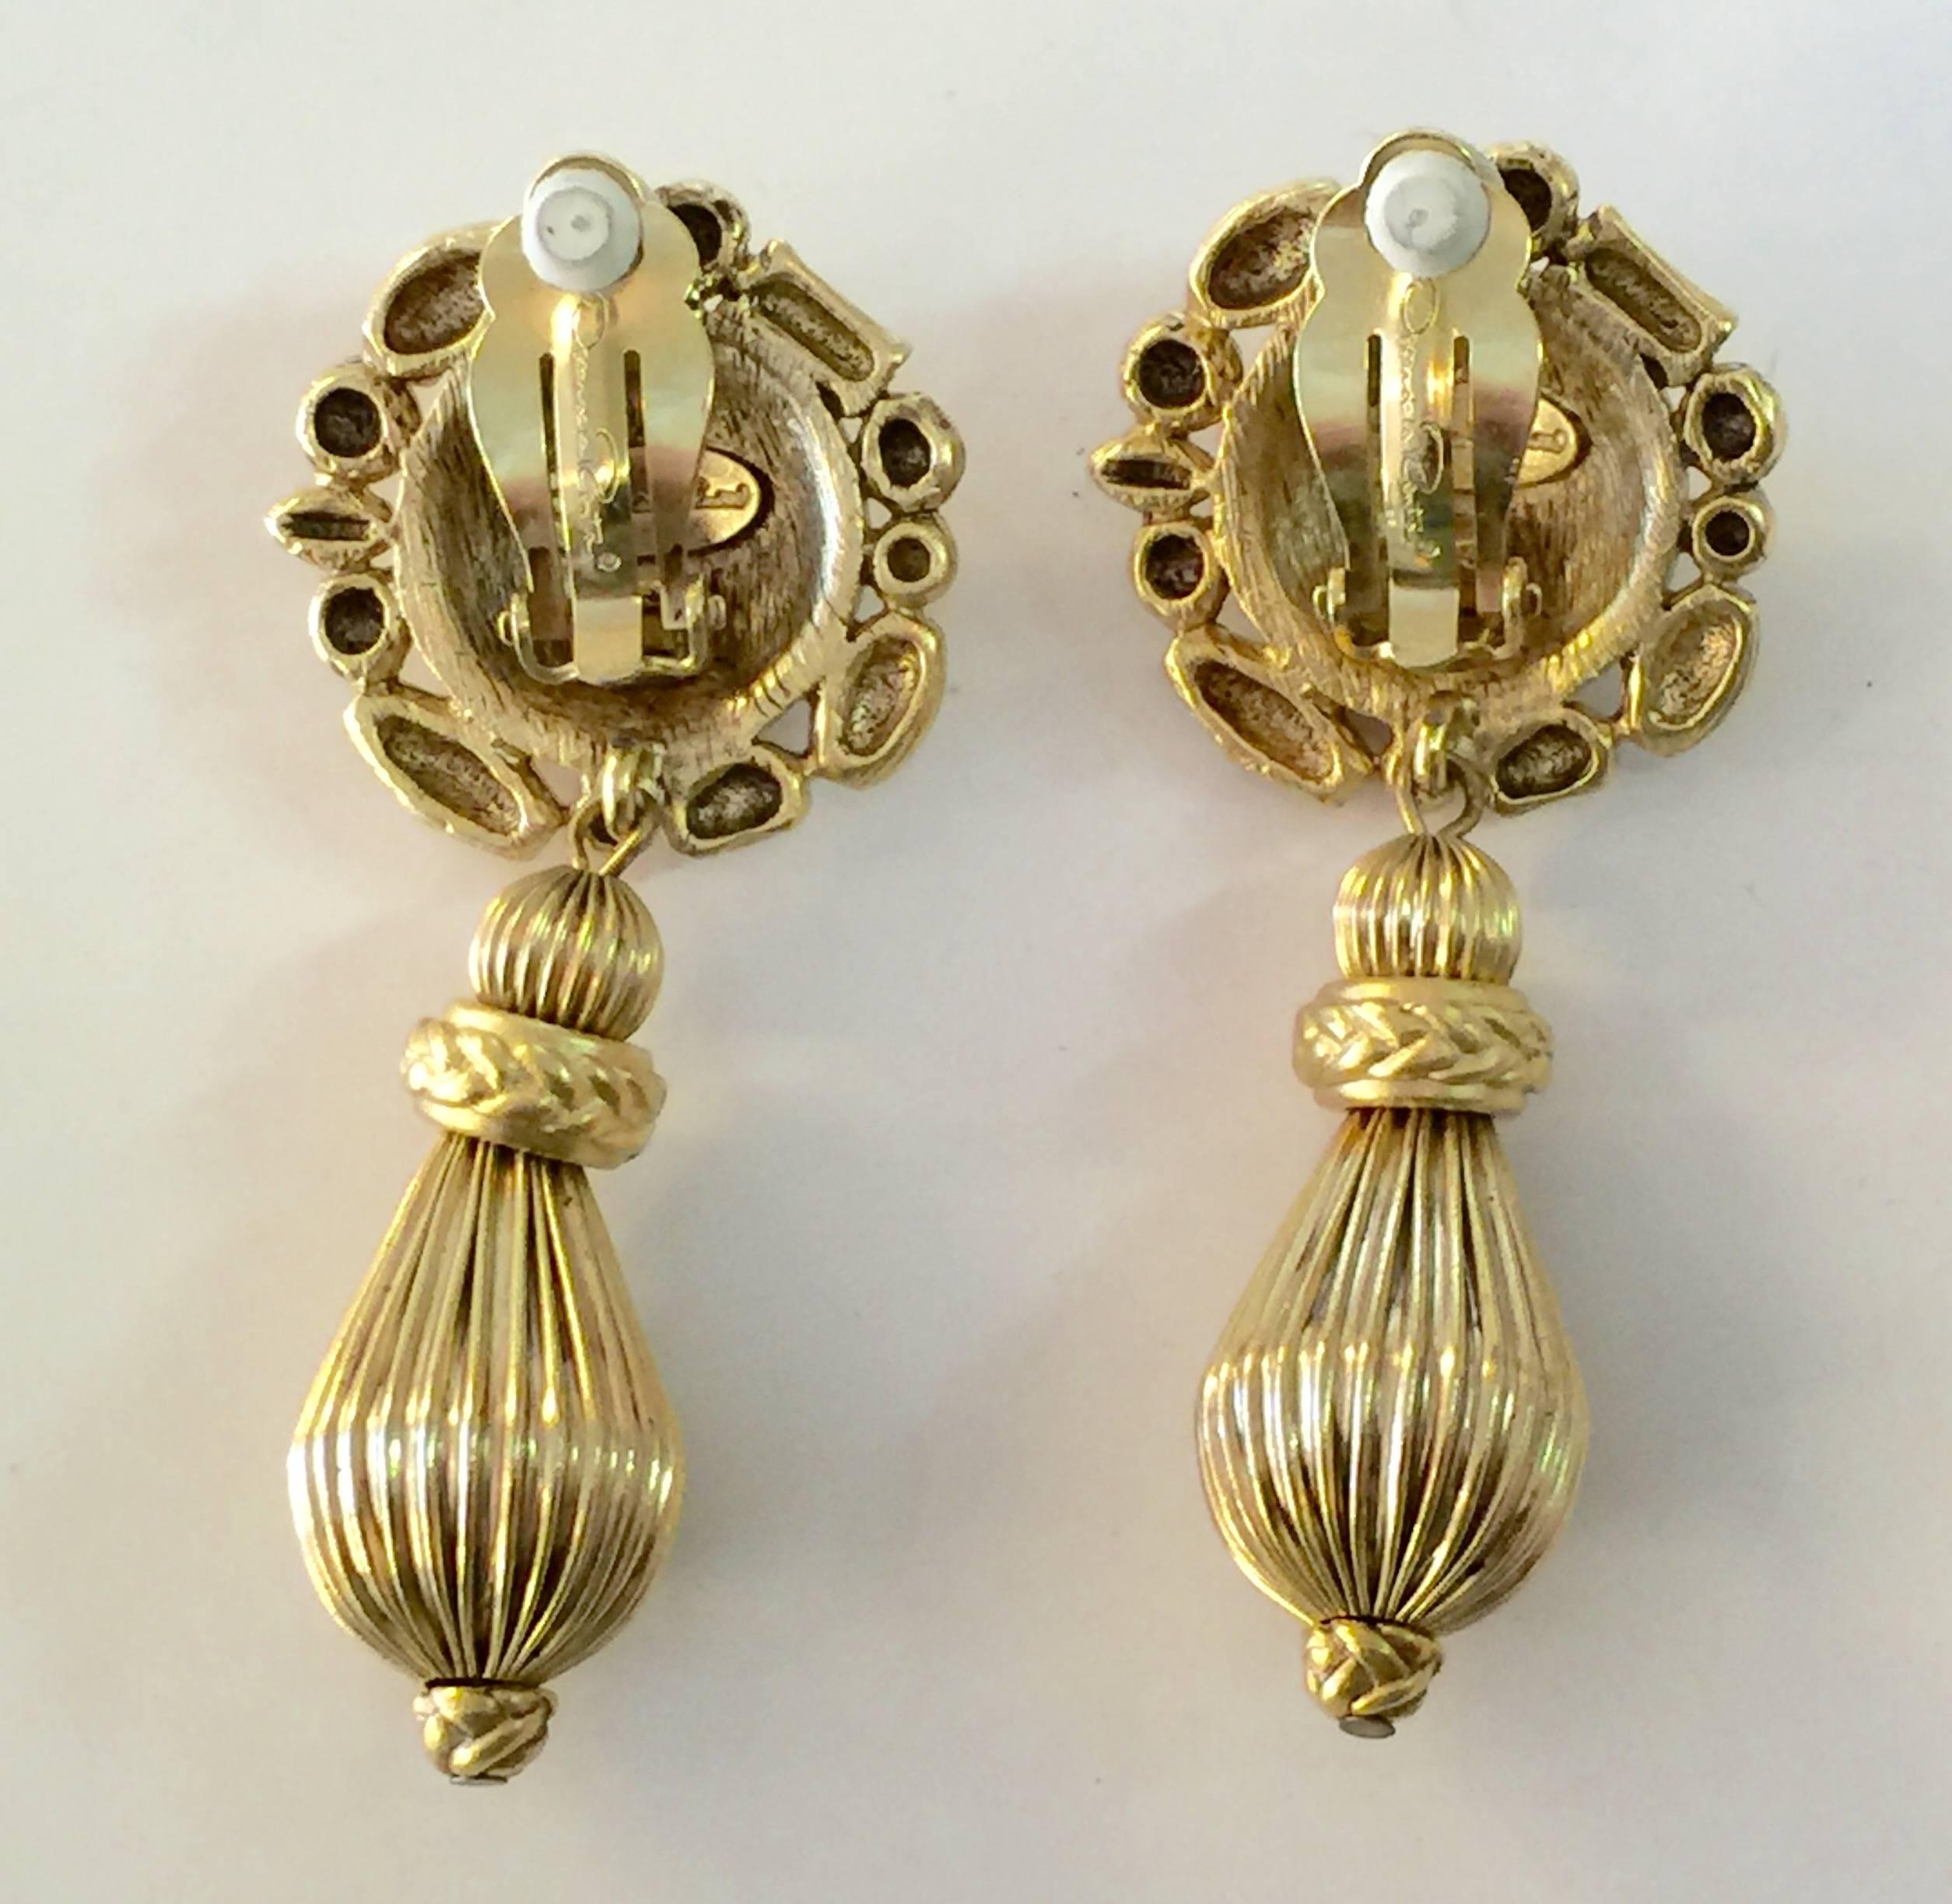 These are classic 80's ODLR, and and are highly wearable, tailored clip on drop earrings. The button top disc is constructed with wired beads and a hammered domed goldtone cabochon of metal, 1